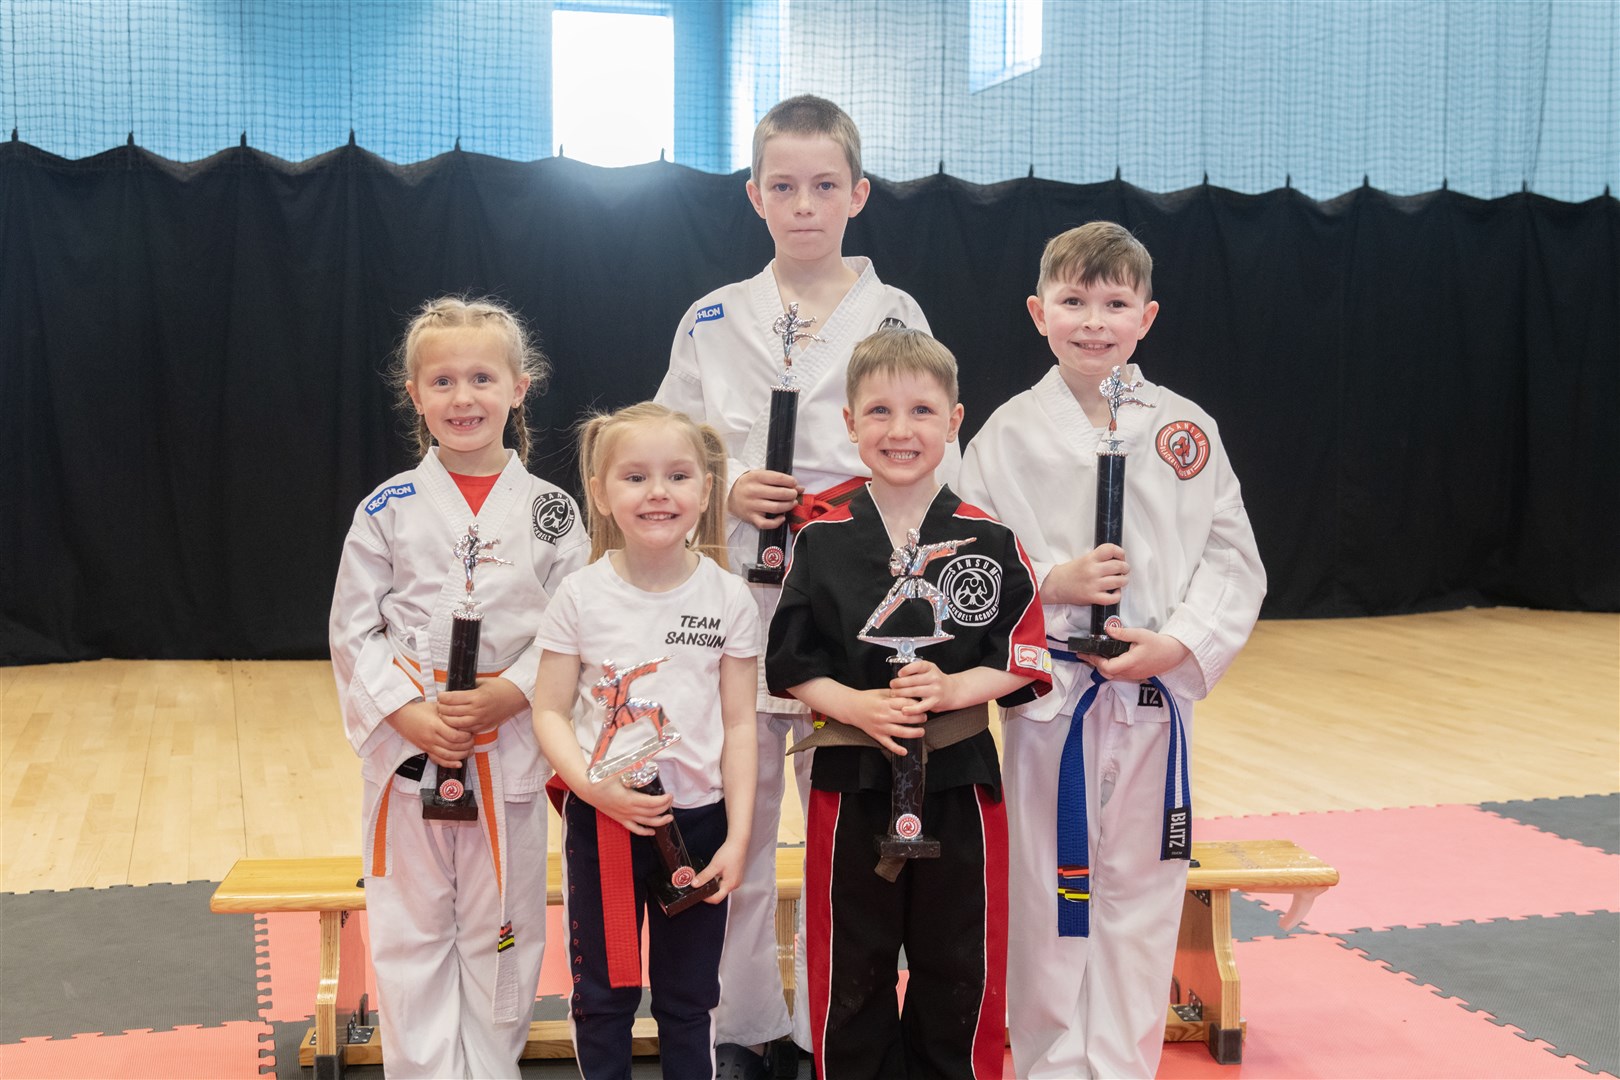 From left: Nieve Boyfield, Issac Munro, Oliver Walker, Abel Reid and Arrabella Ross were the junior trophy winners at Sansum's Spring Championship at Moray Sports Centre in Elgin...Picture: Beth Taylor.